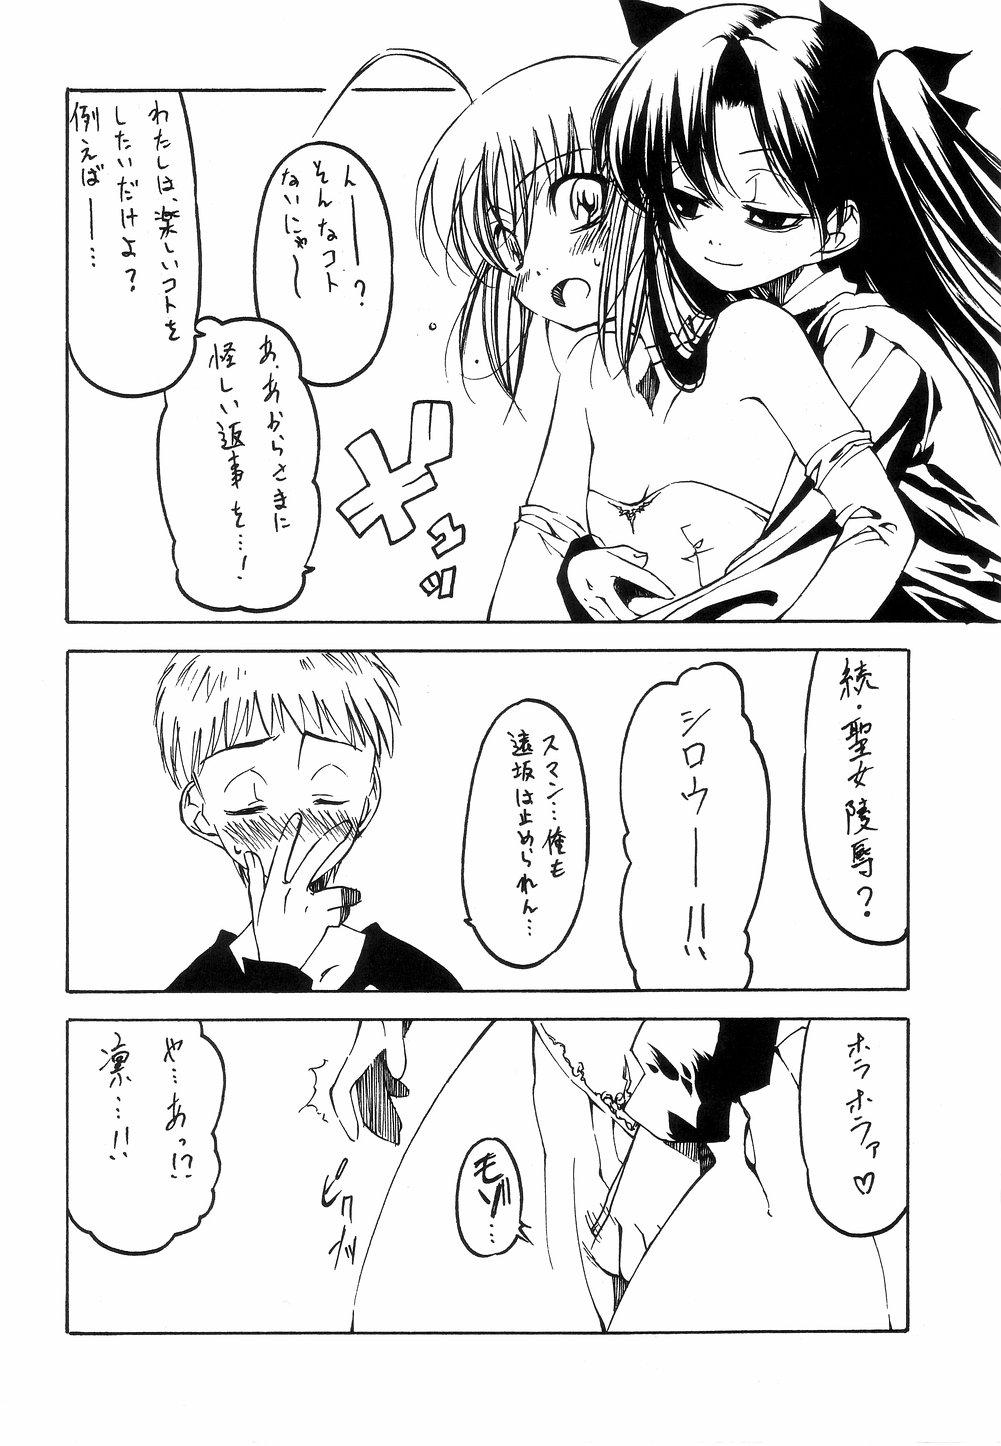 Assfuck Ou no Kigae - Fate stay night Gay Party - Page 5